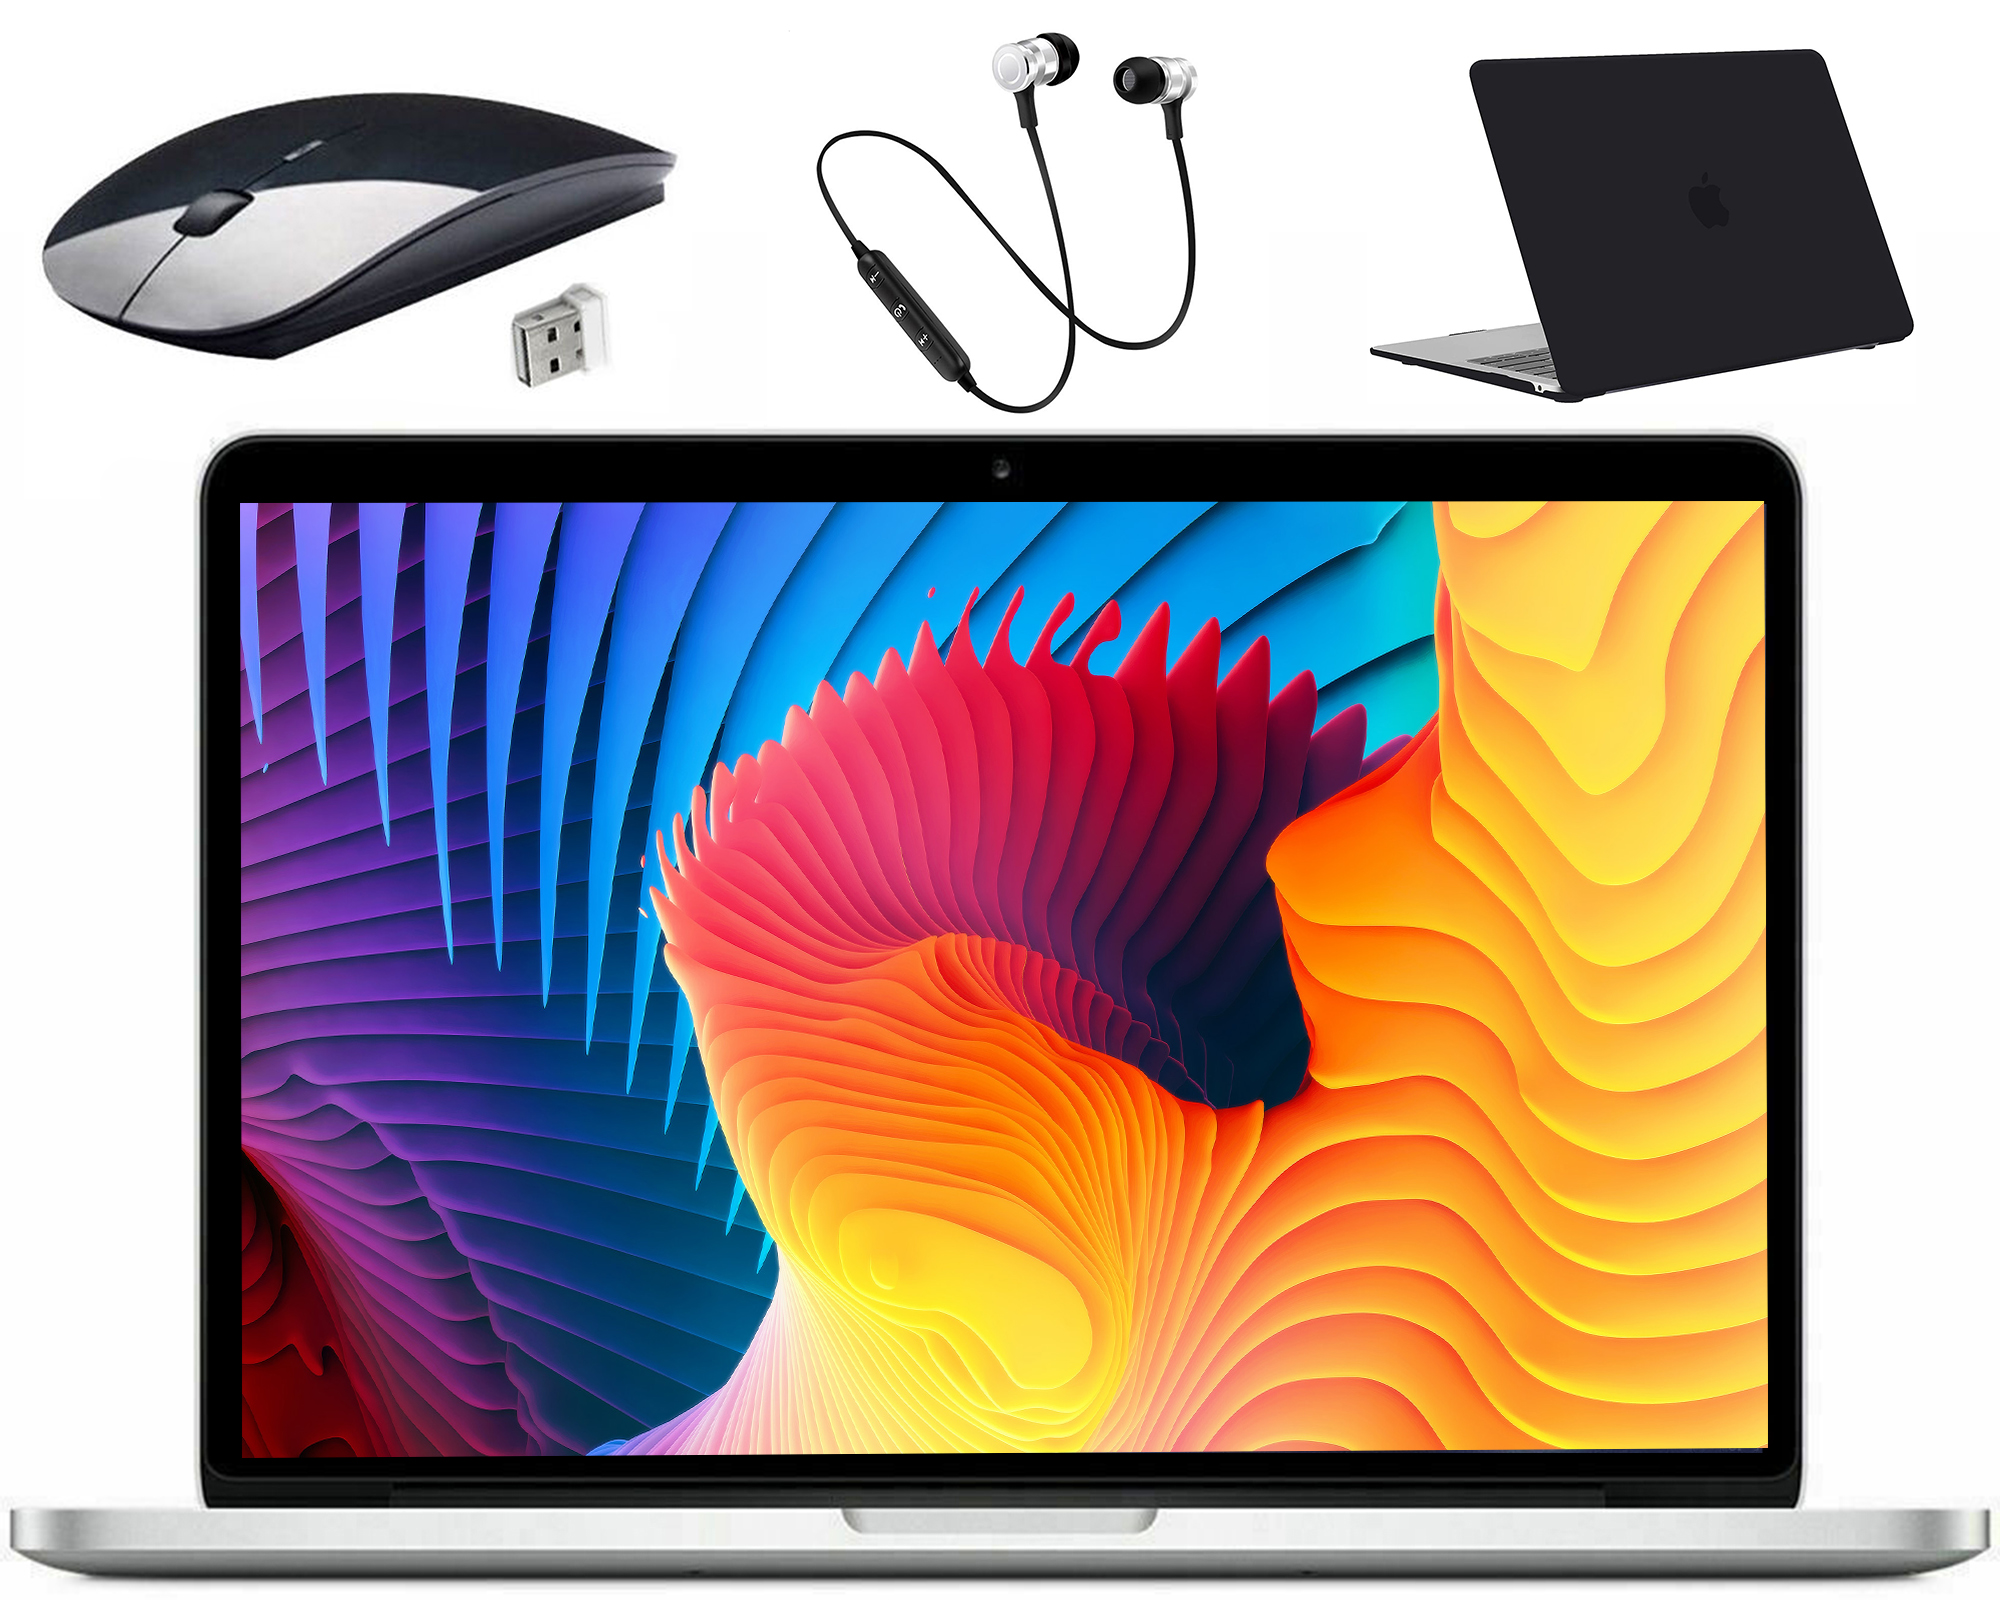 Refurbished Apple MacBook Pro Laptop, 13.3-inch, Intel Core i5, 8GB RAM,  Mac OS, 500GB HDD, and Bundle: Wireless Mouse, Bluetooth Headset, Black  Case Silver